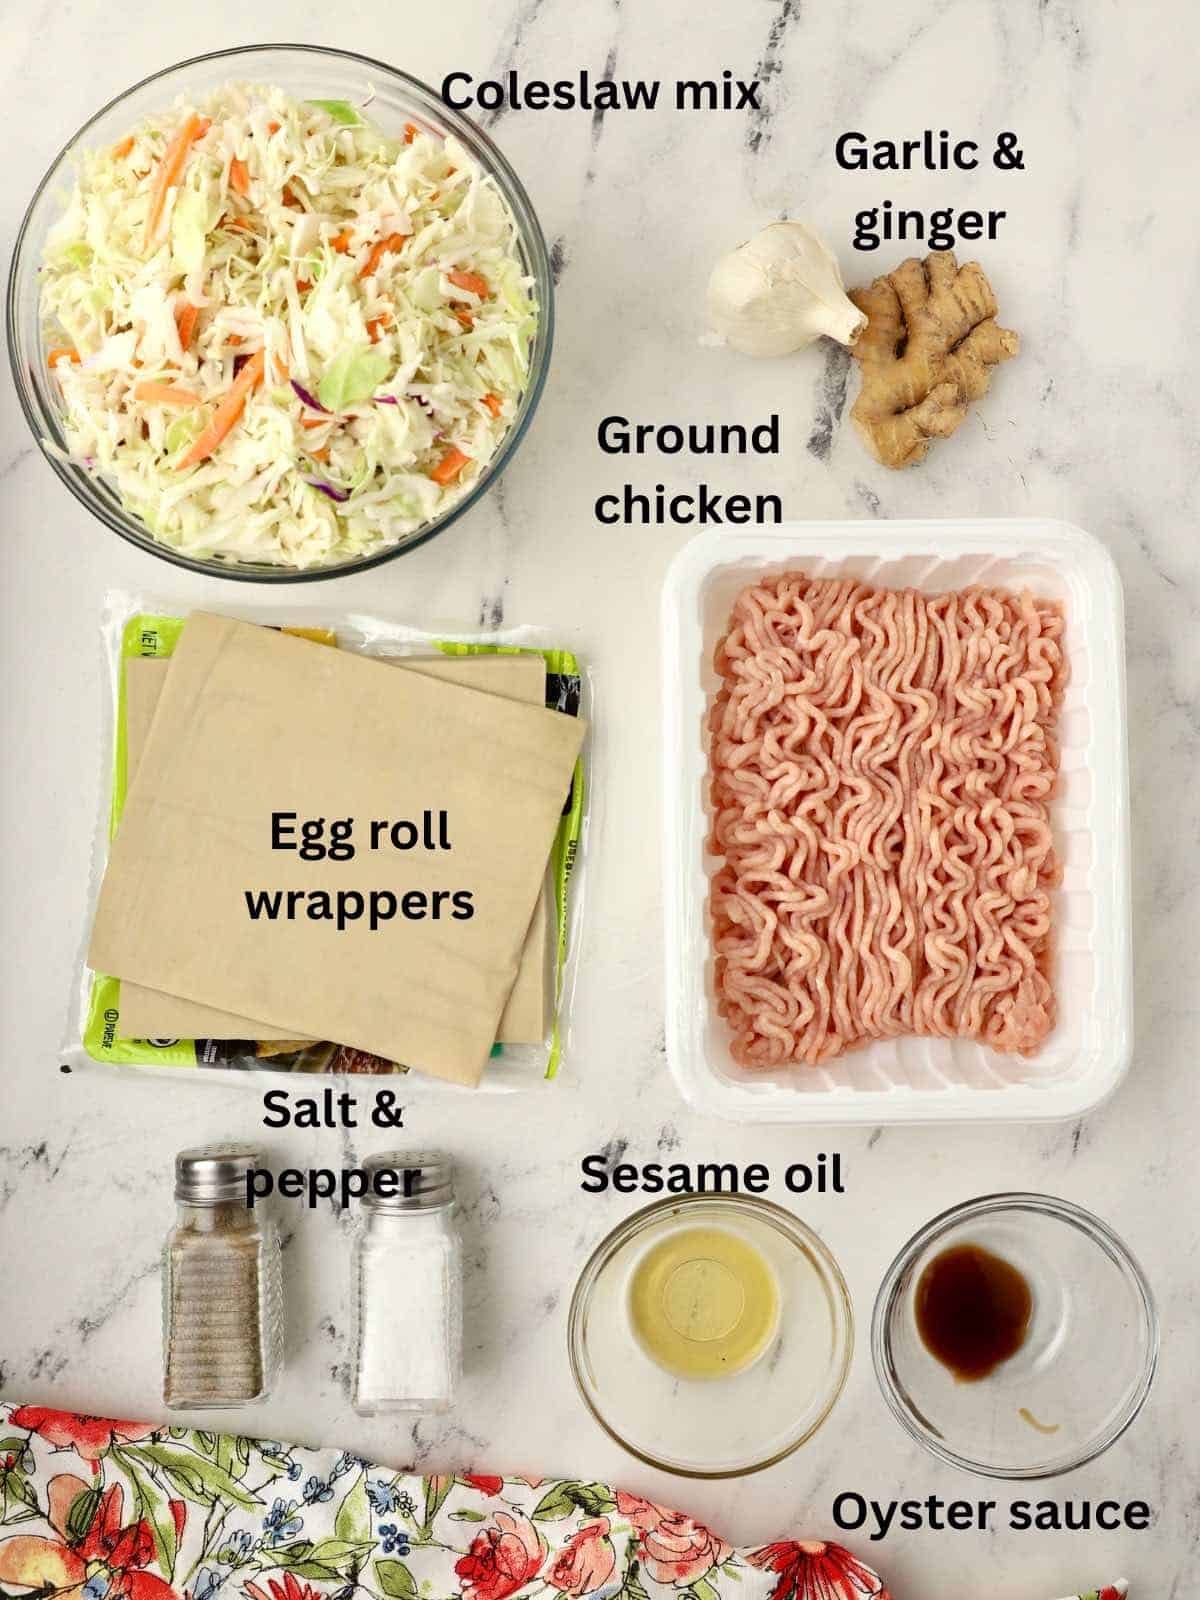 Ground raw chicken, wrappers, and coleslaw mix to make egg rolls.